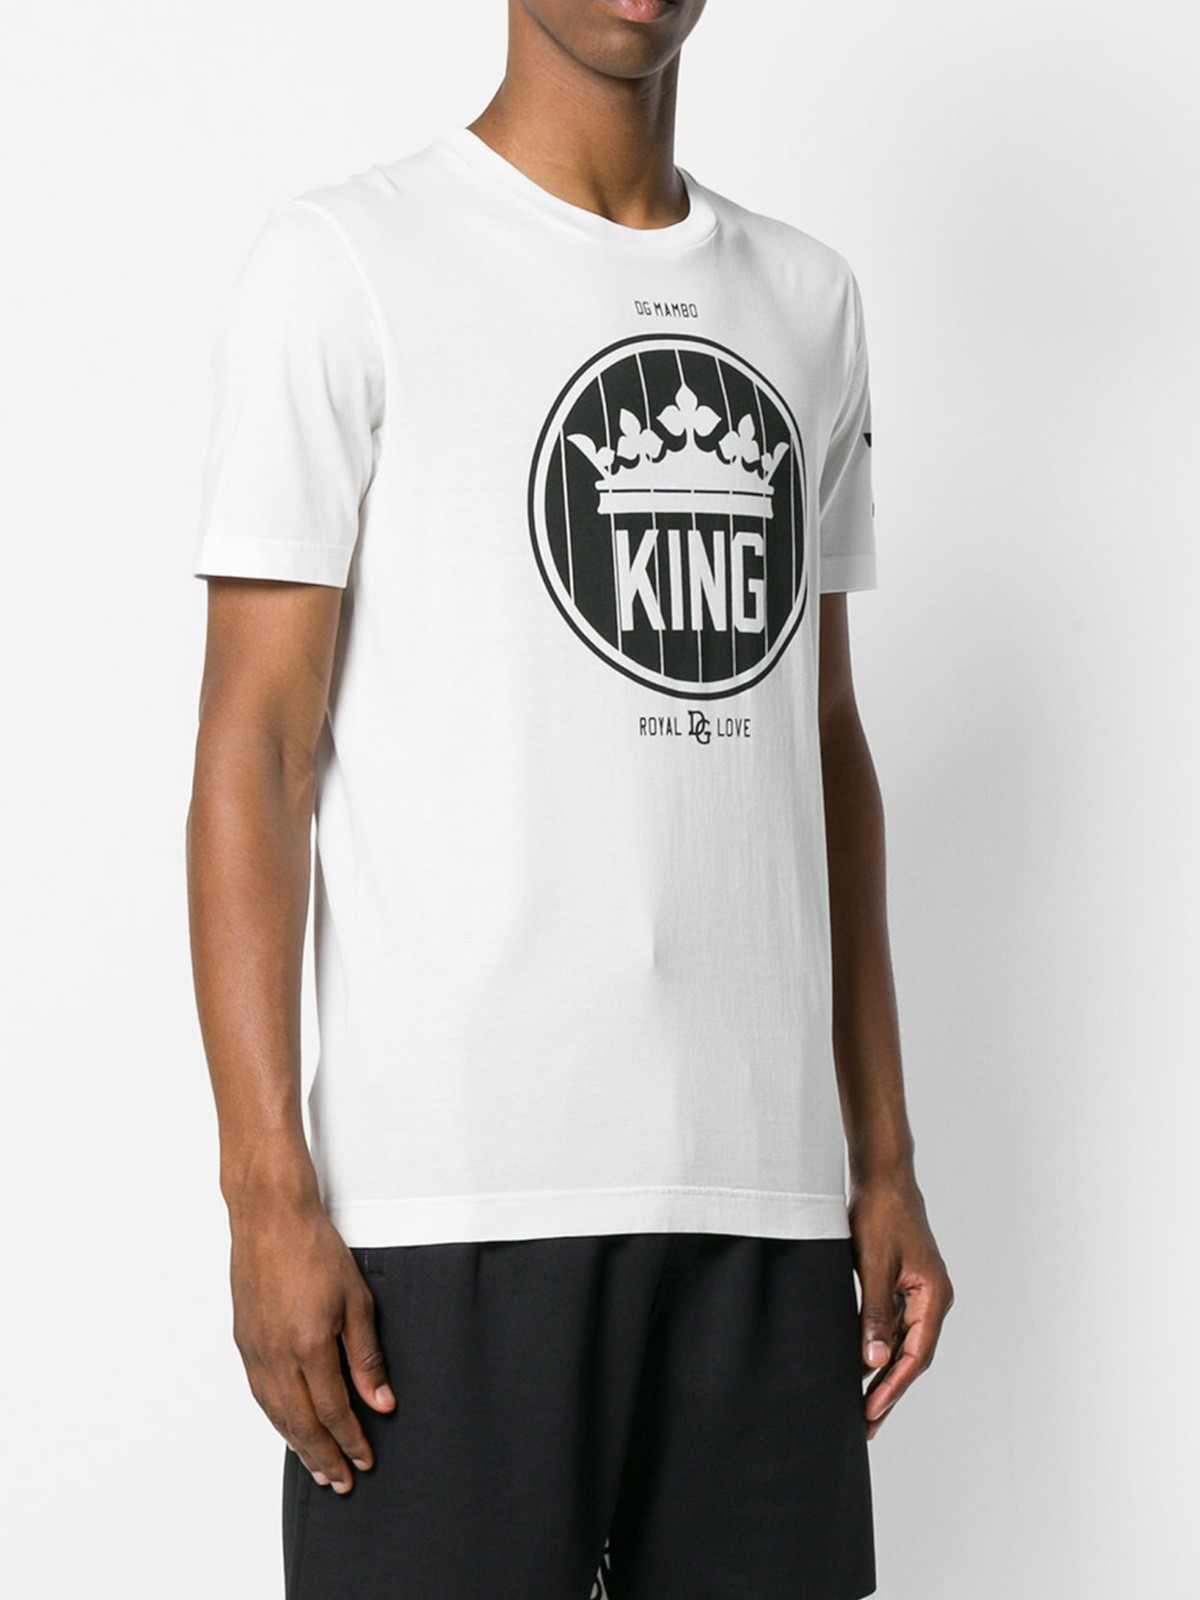 dolce & gabbana KING CREW PRINT T-SHIRT available on montiboutique.com ...